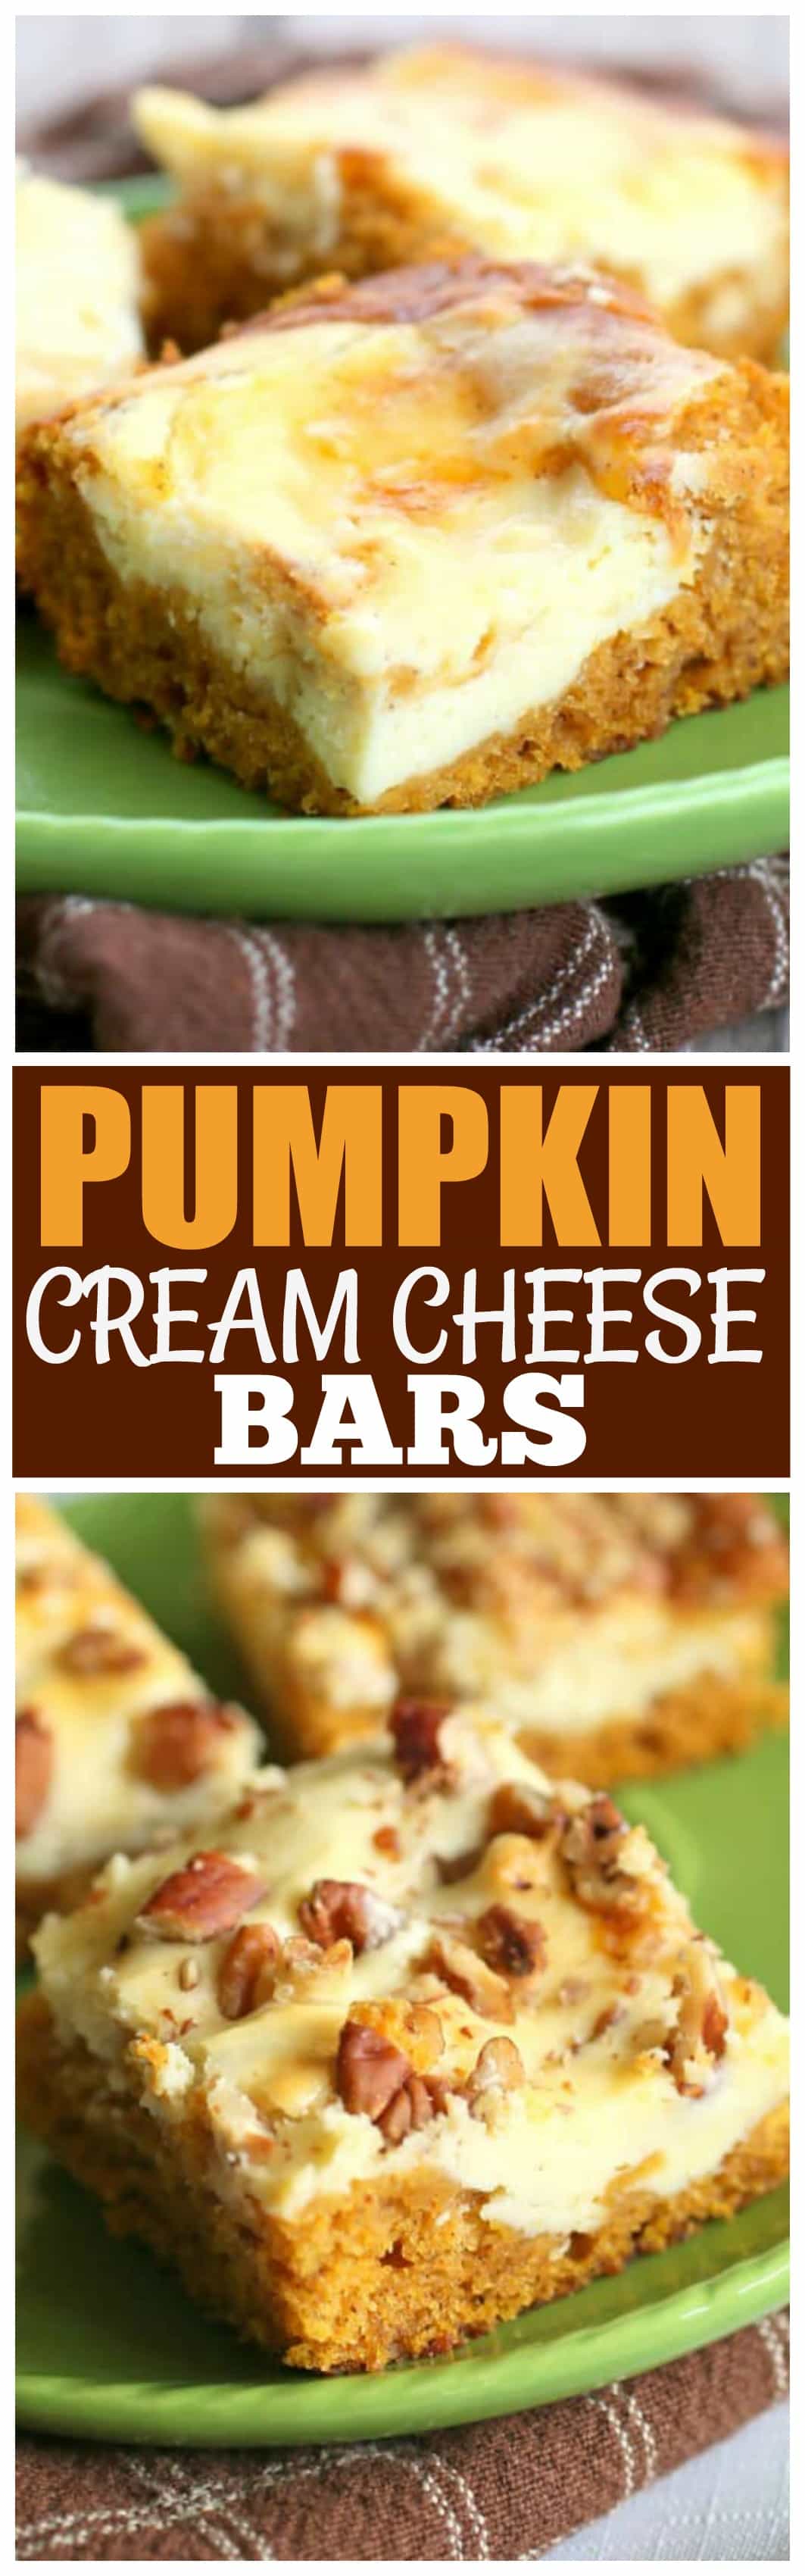 These Pumpkin Cream Cheese Bars are moist pumpkin bars with swirls of cream cheese throughout. This will be on your fall treat list every year. #pumpkin #creamcheese #bars #dessert #fall #recipes